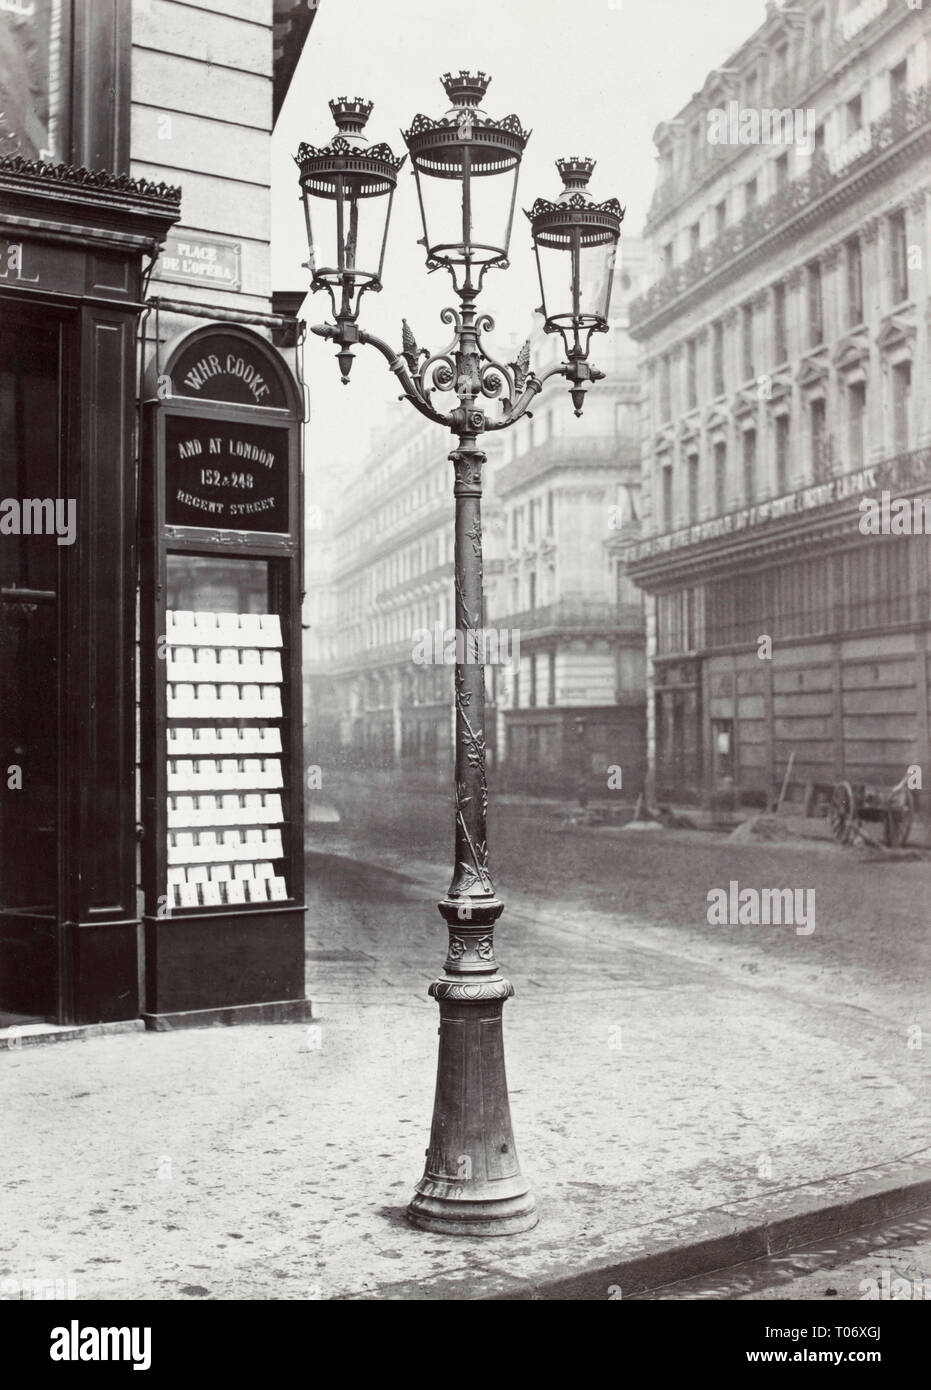 Oudry style lamp stand with three lamps on a street corner in Paris, near Place de l'Opera, Paris, France. Stock Photo